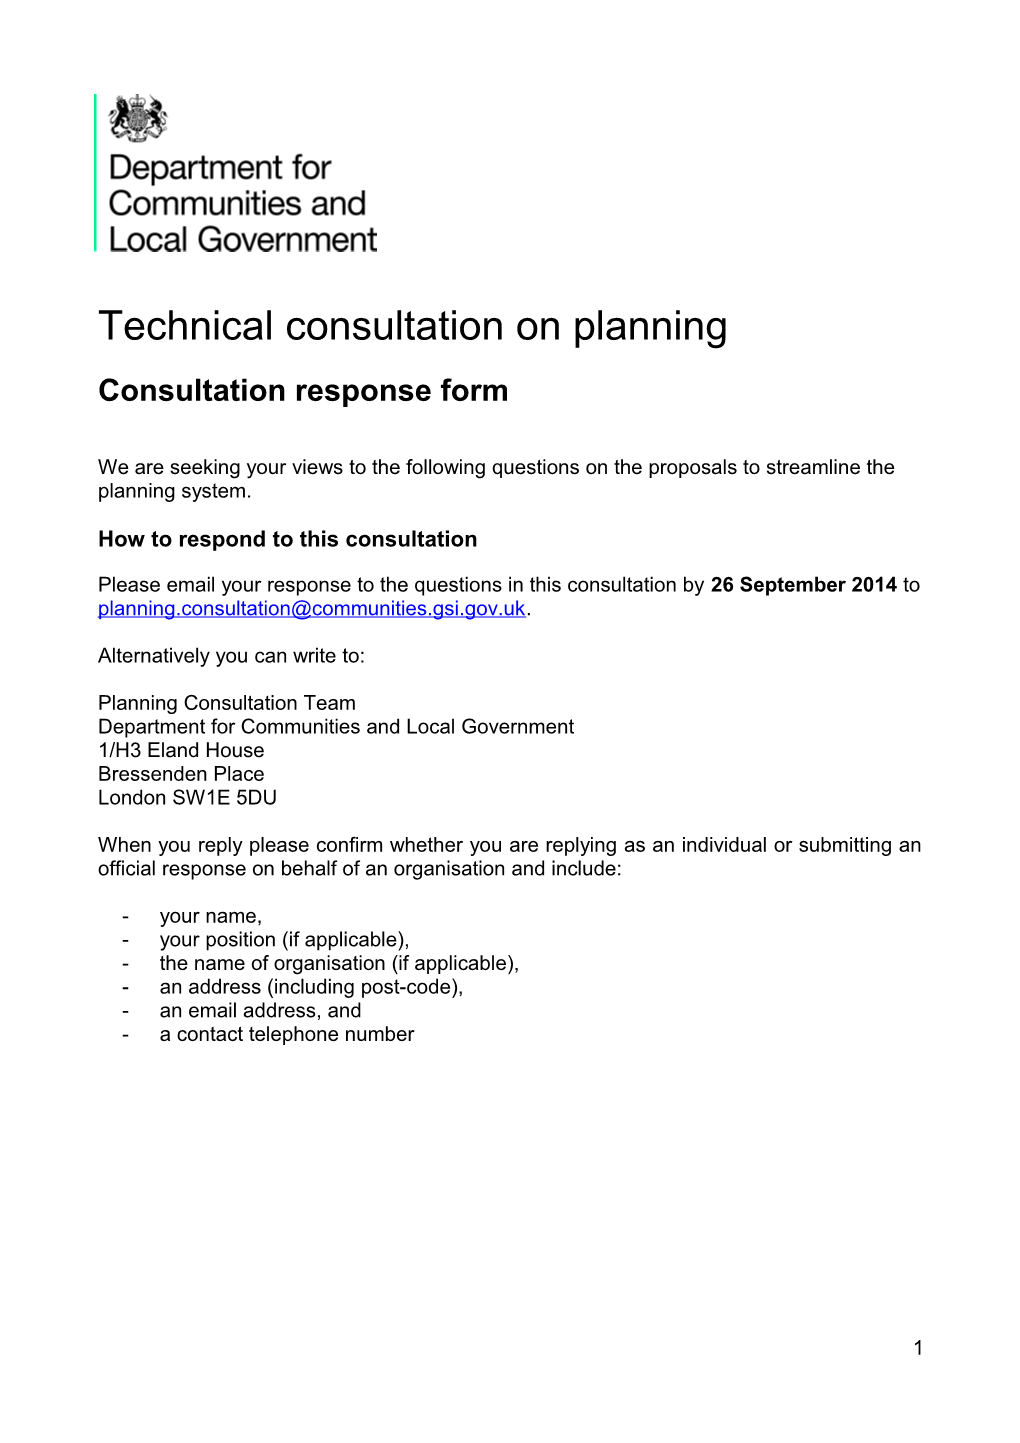 Technical Consultation on Planning - Consultation Response Form